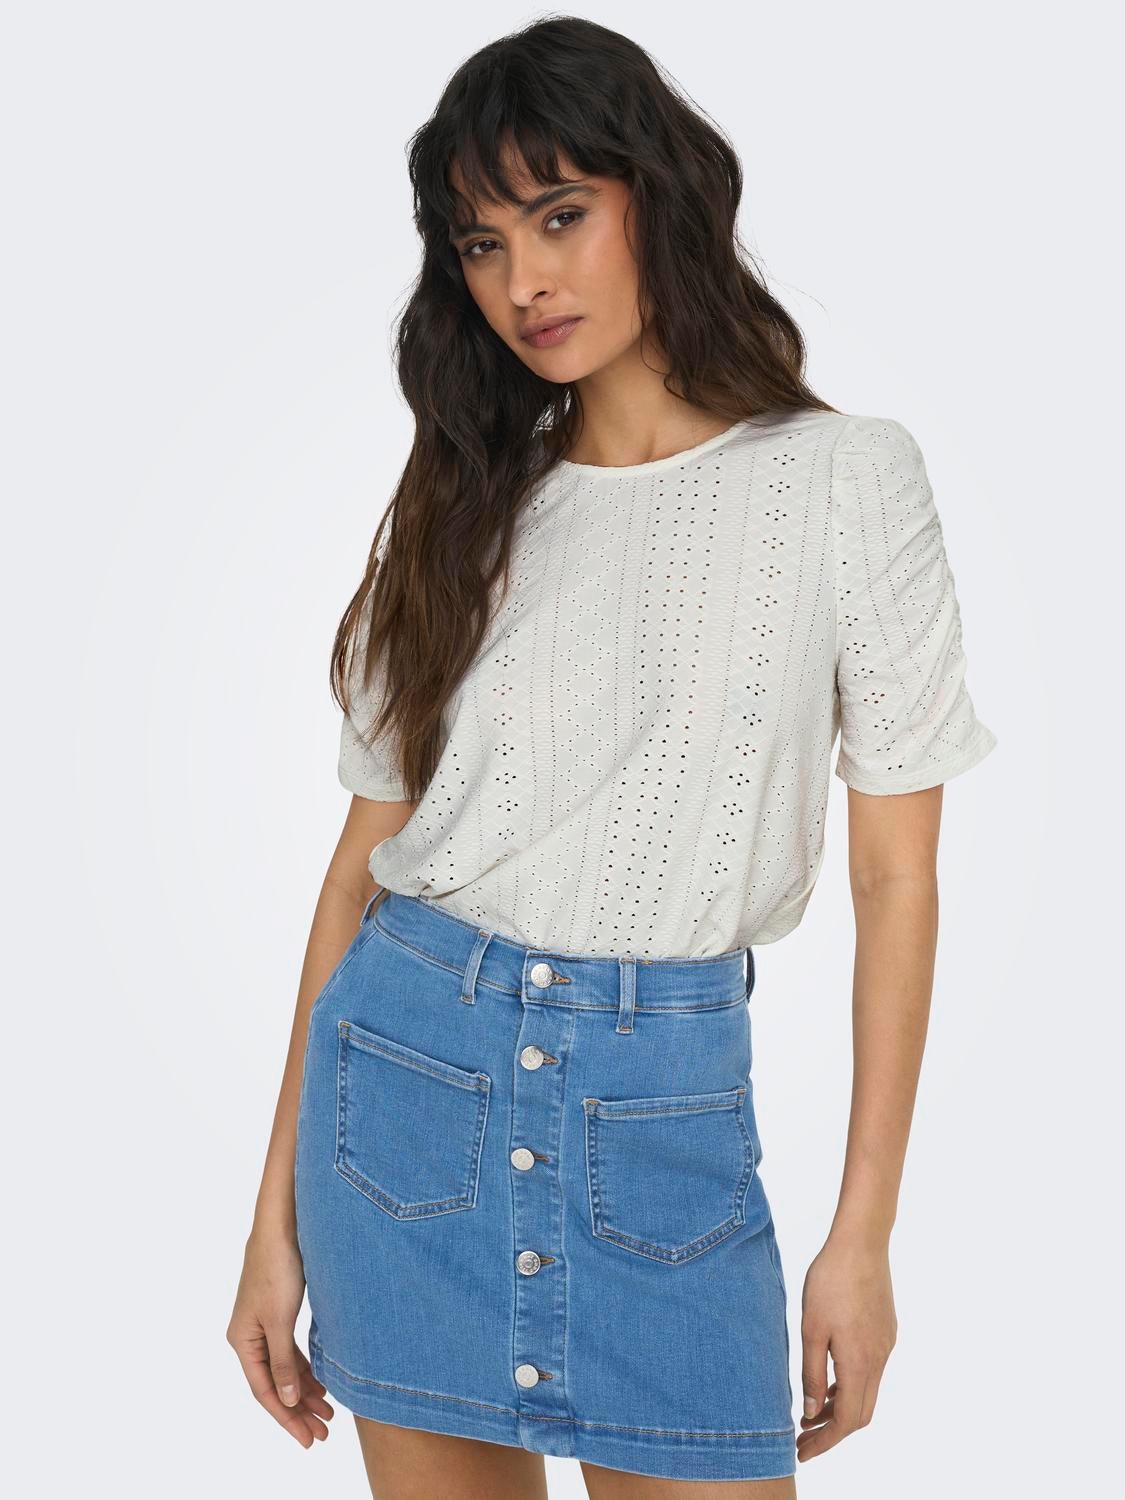 ONLY Regular Fit Round Neck Puff sleeves Top -Cloud Dancer - 15289686